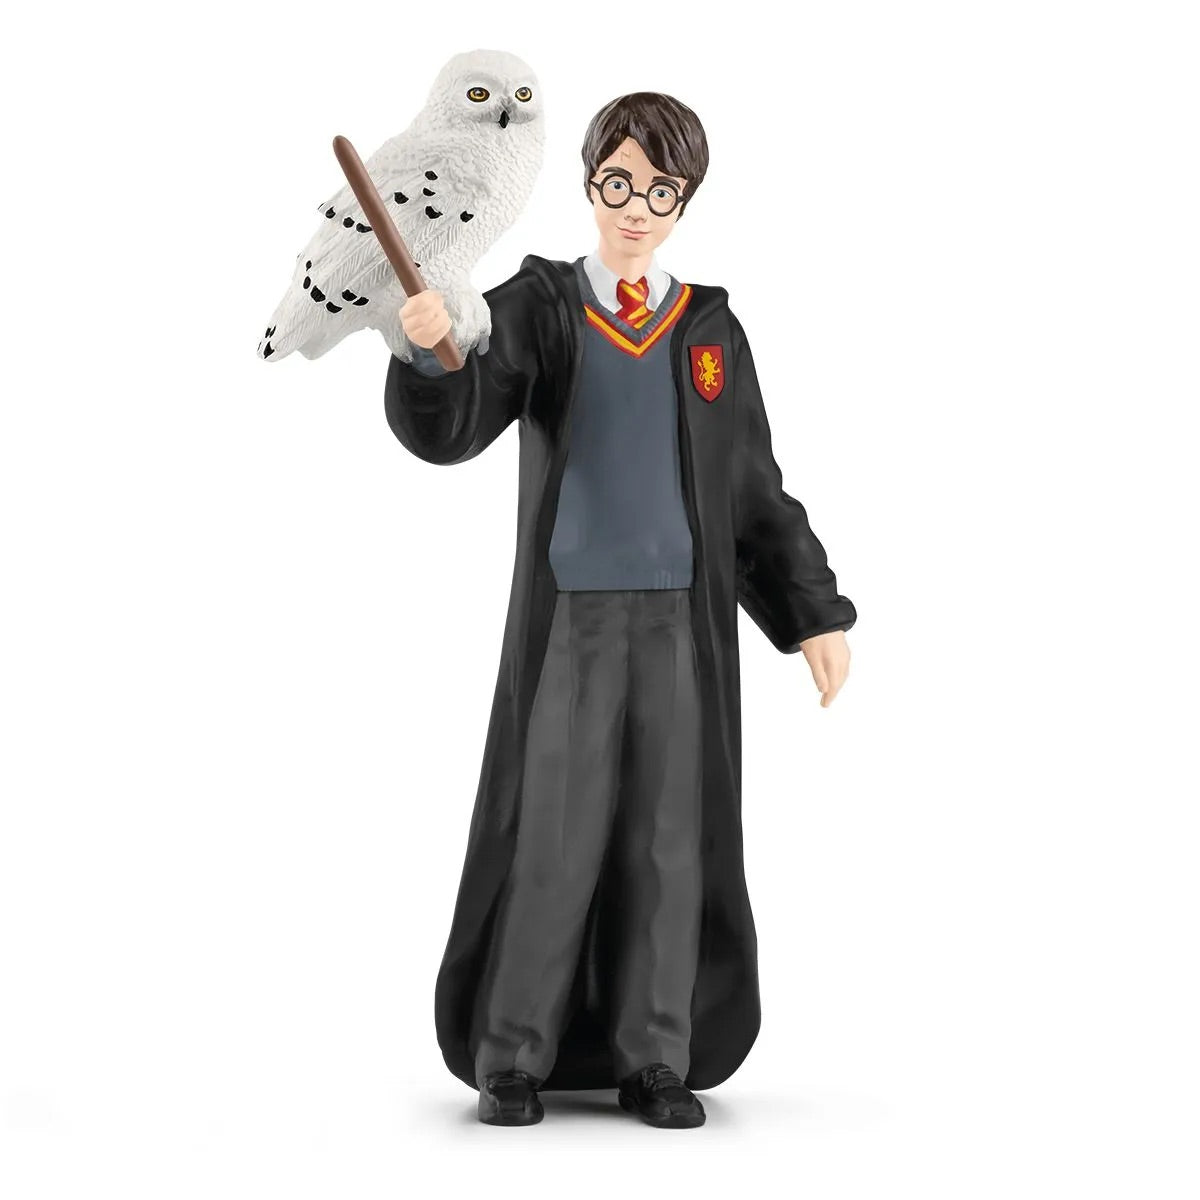 Harry Potter Harry & Hedwig Figurine by Schleich #42633